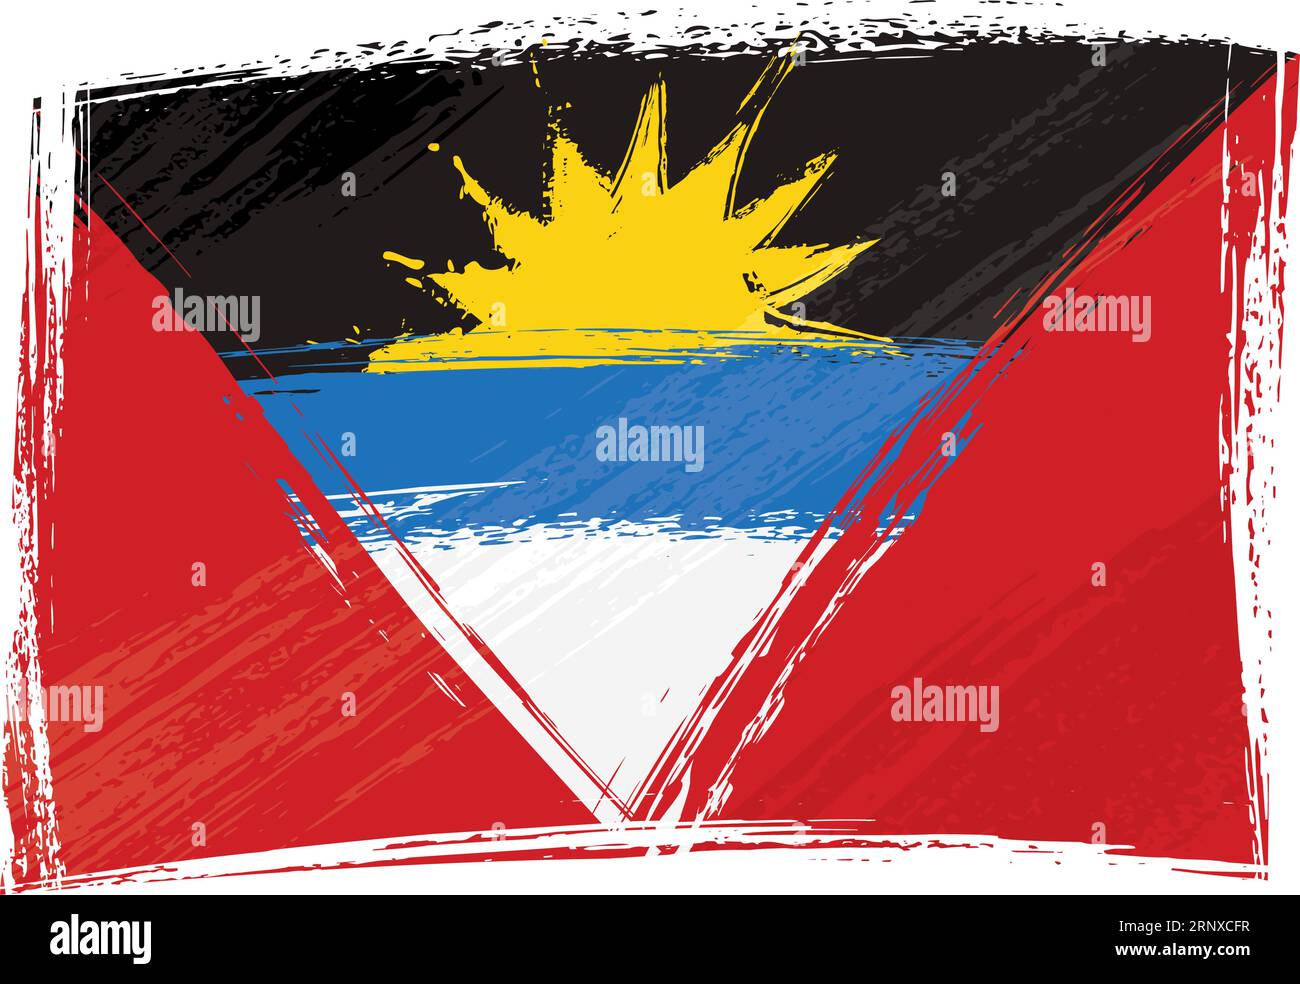 Antigua and Barbuda national flag created in grunge style Stock Vector